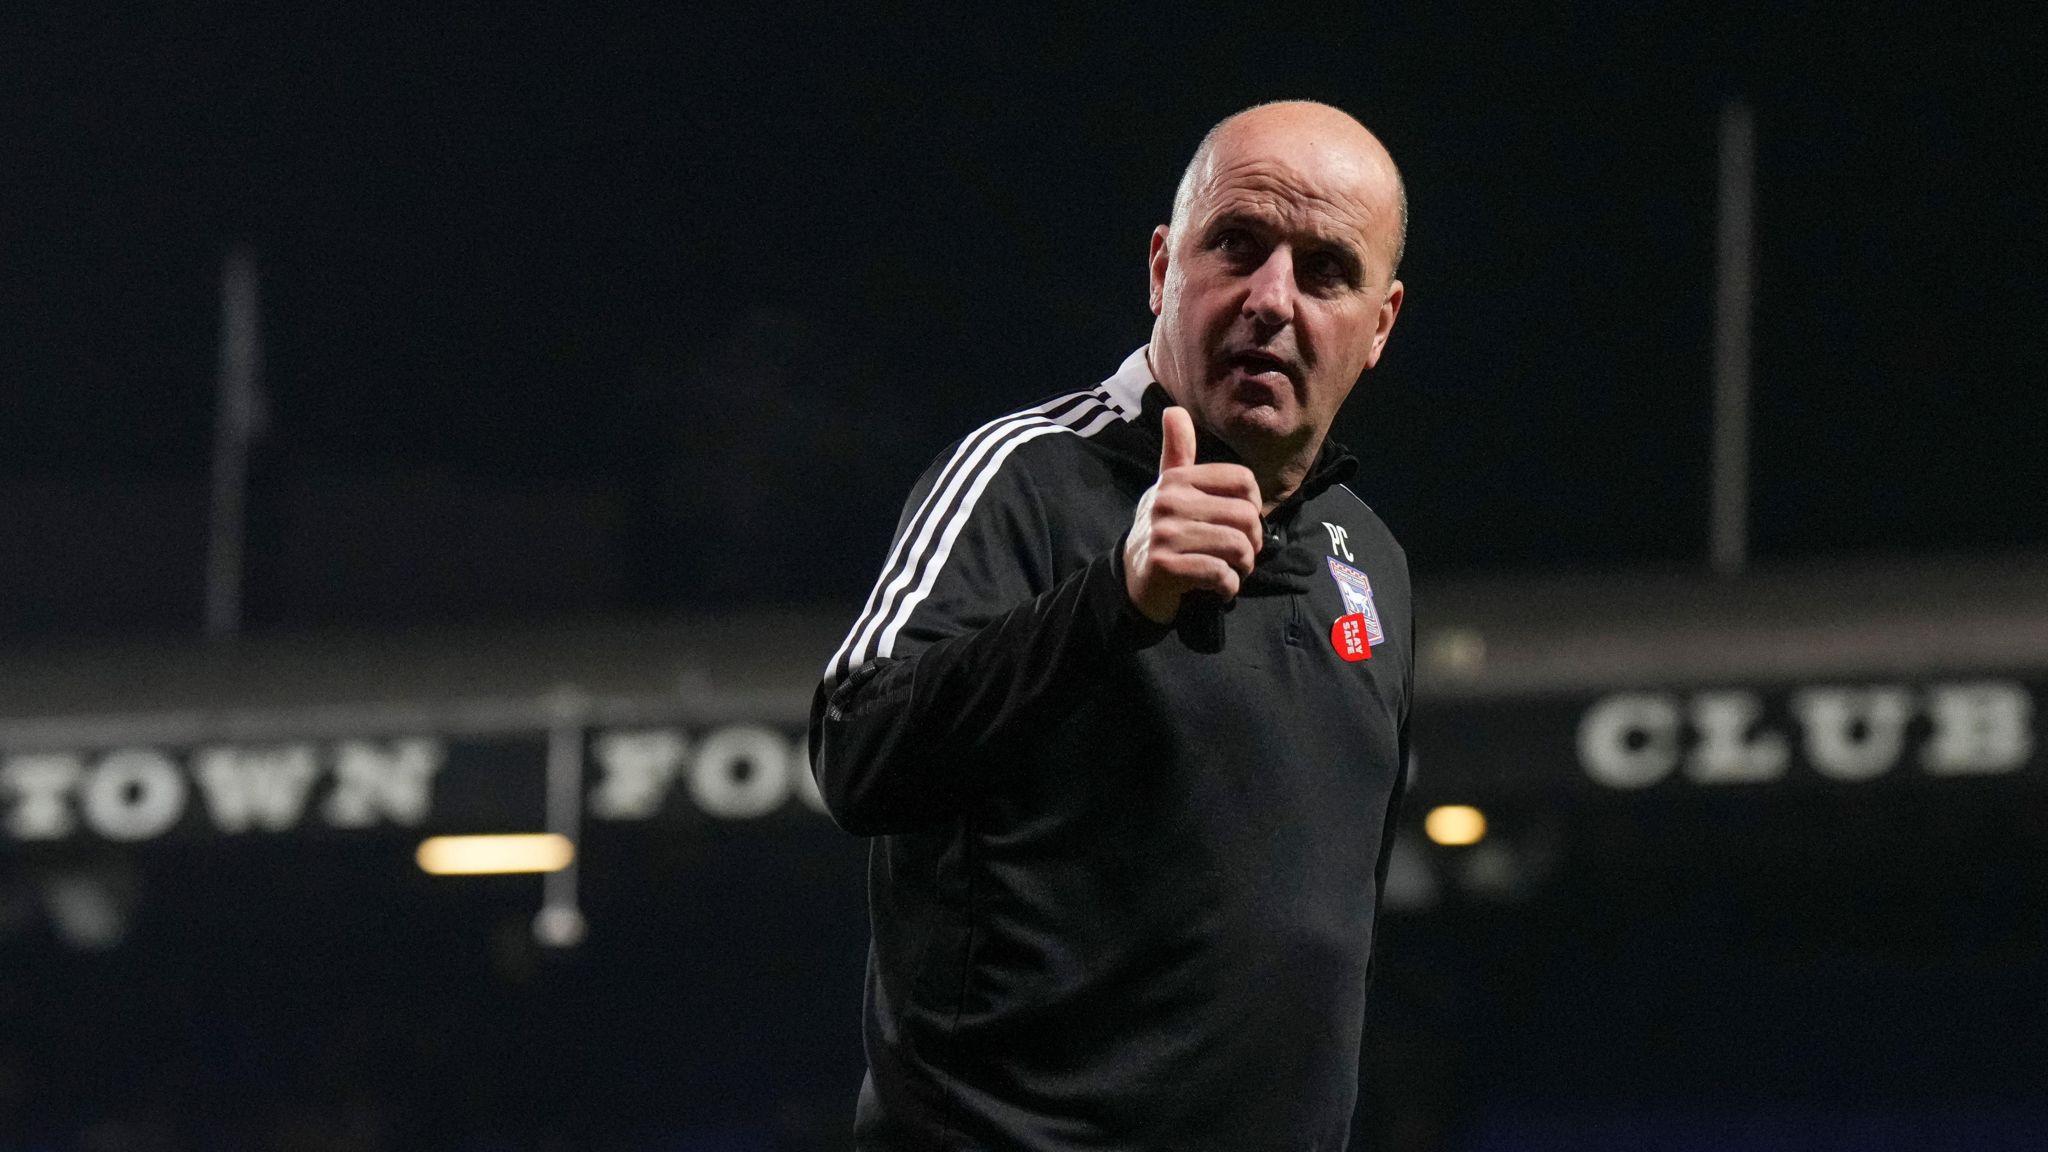 Former Ipswich manager Paul Cook